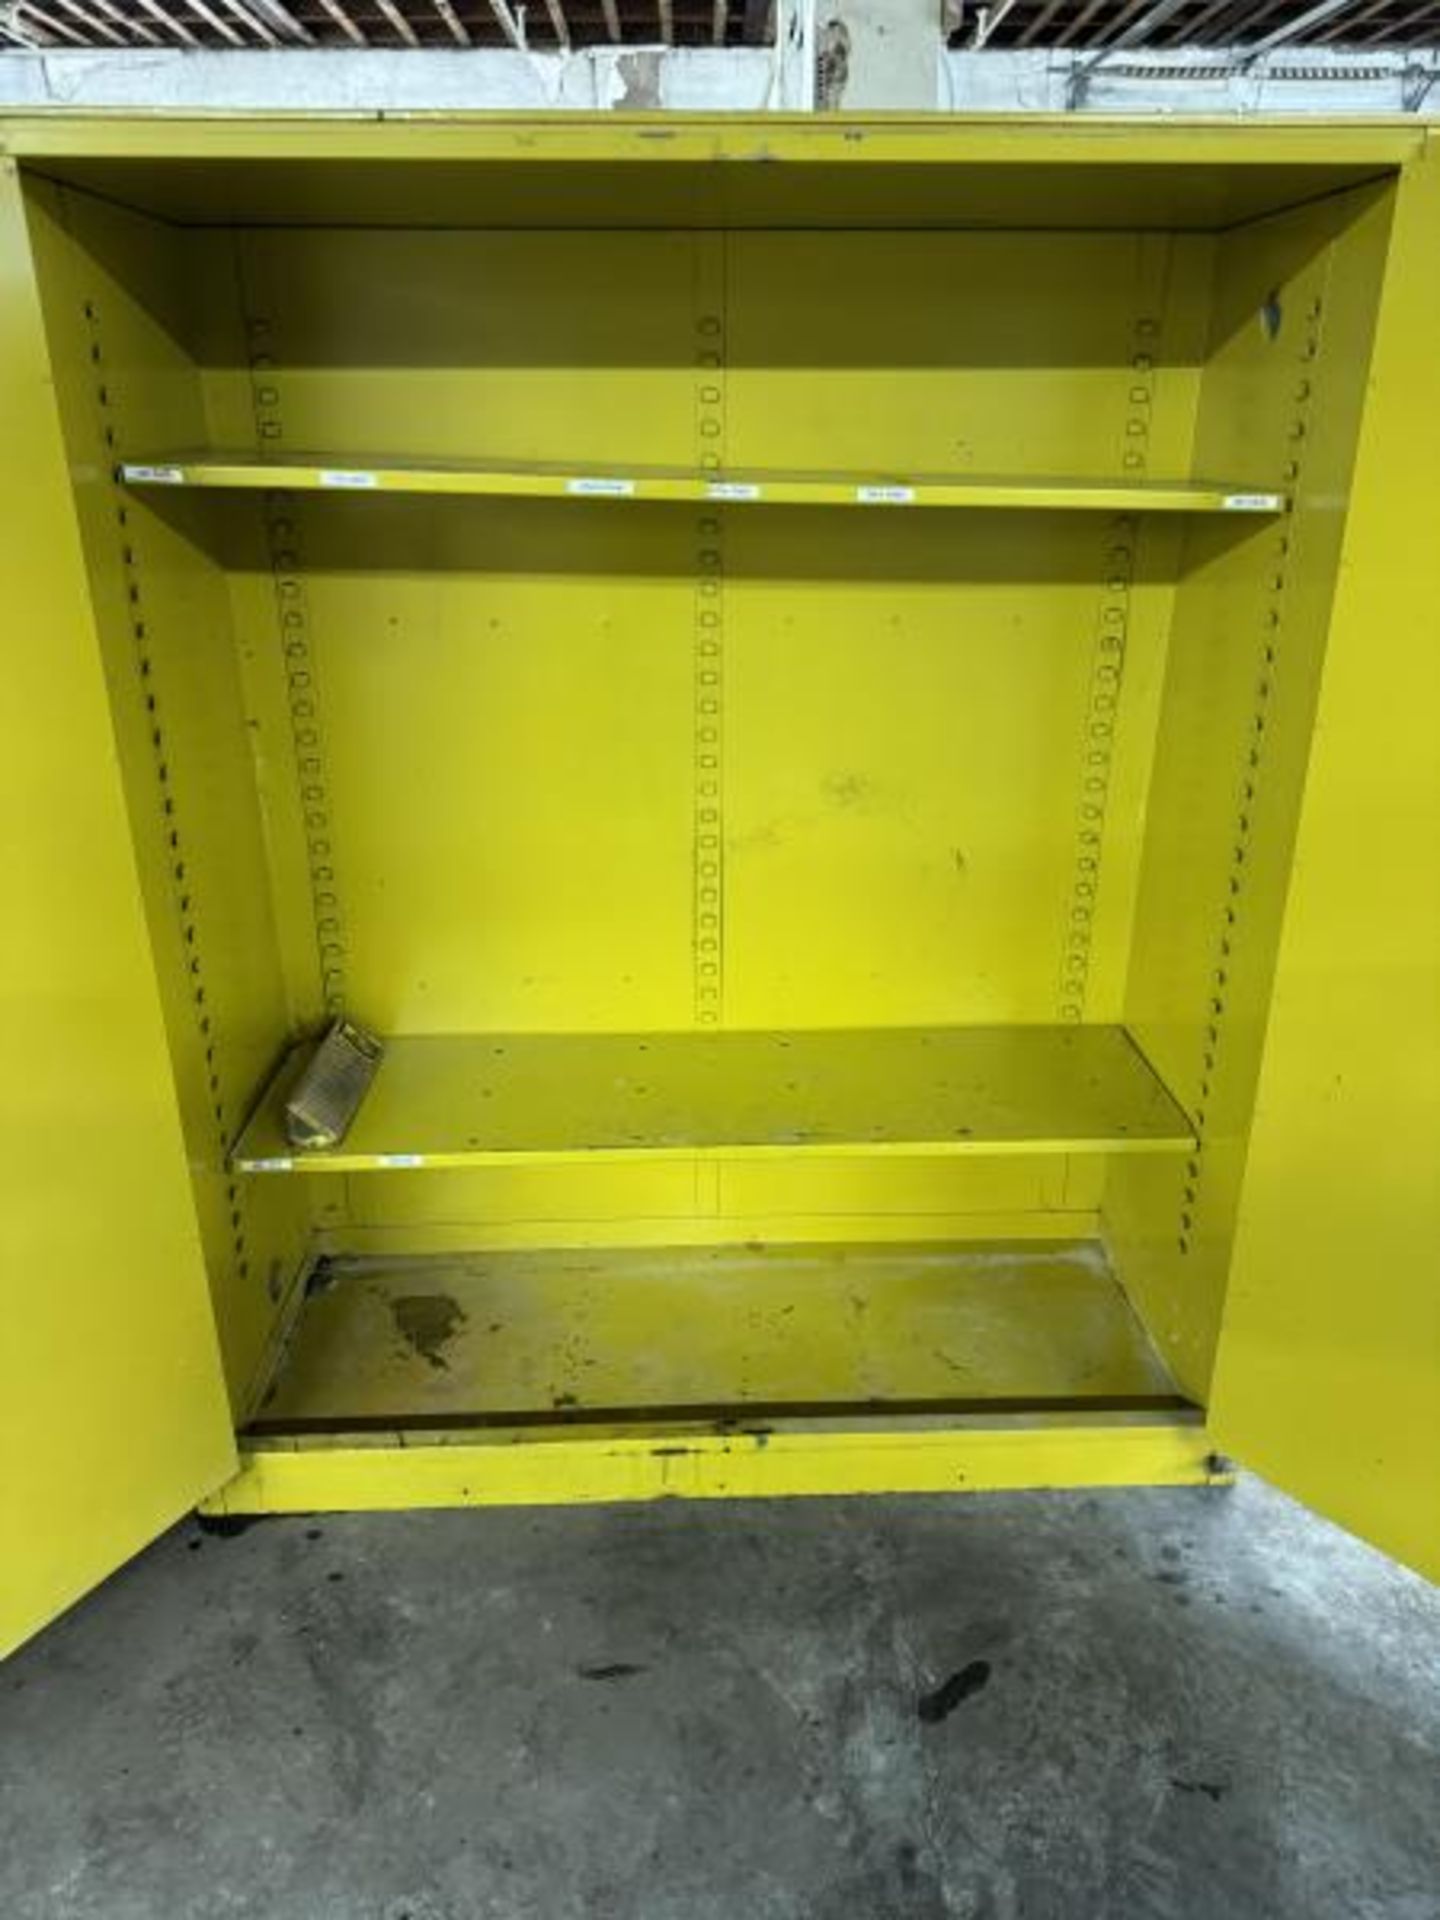 Protectoseal Flammable Liquid Storage Cabinet 56" Wide x 23" Deep x 65" Tall - Image 3 of 4